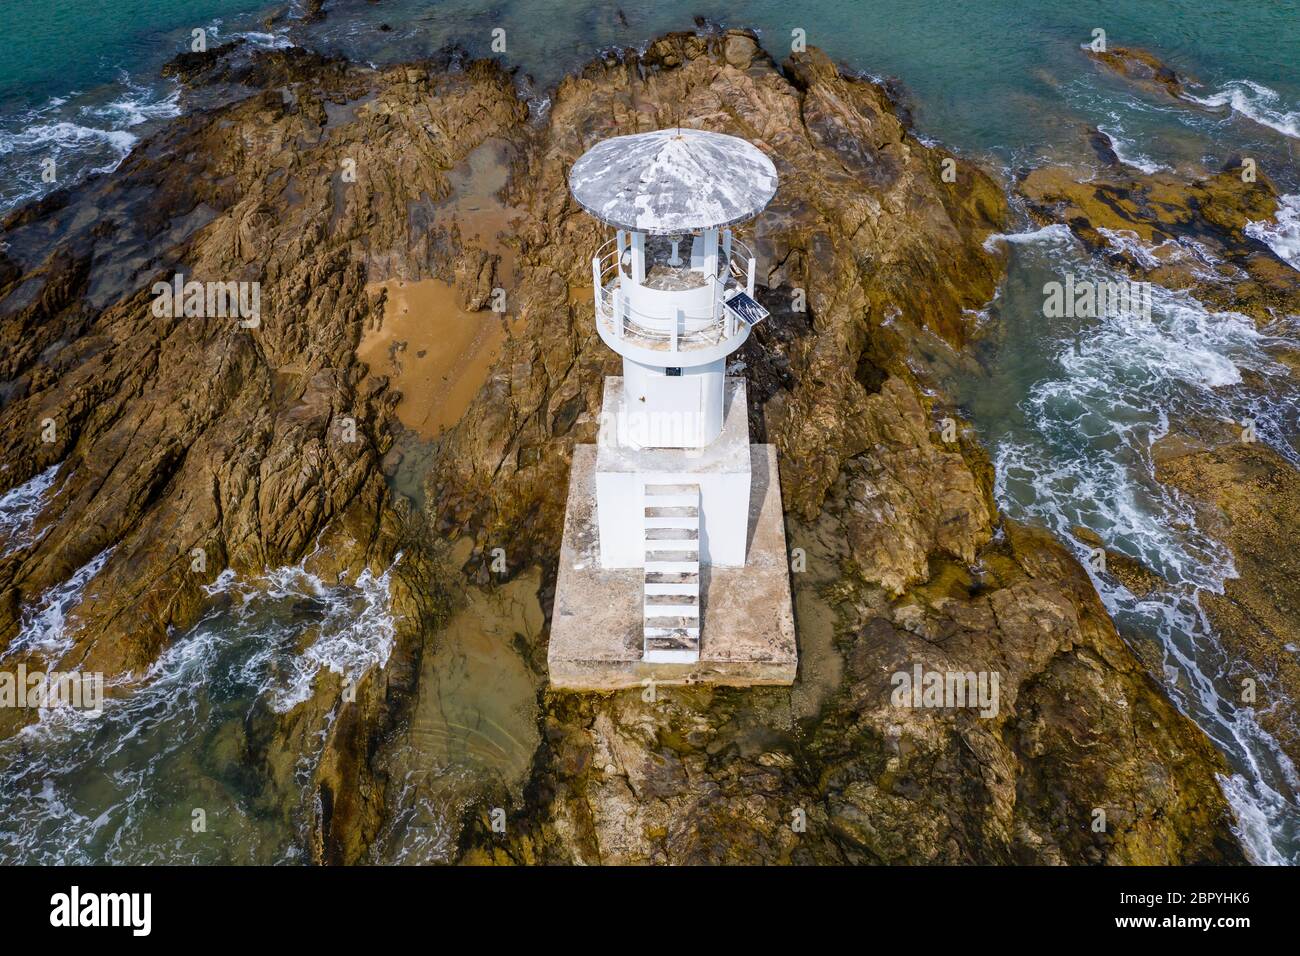 Drone view of a small offshore lighthouse located on a small, rocky island Stock Photo